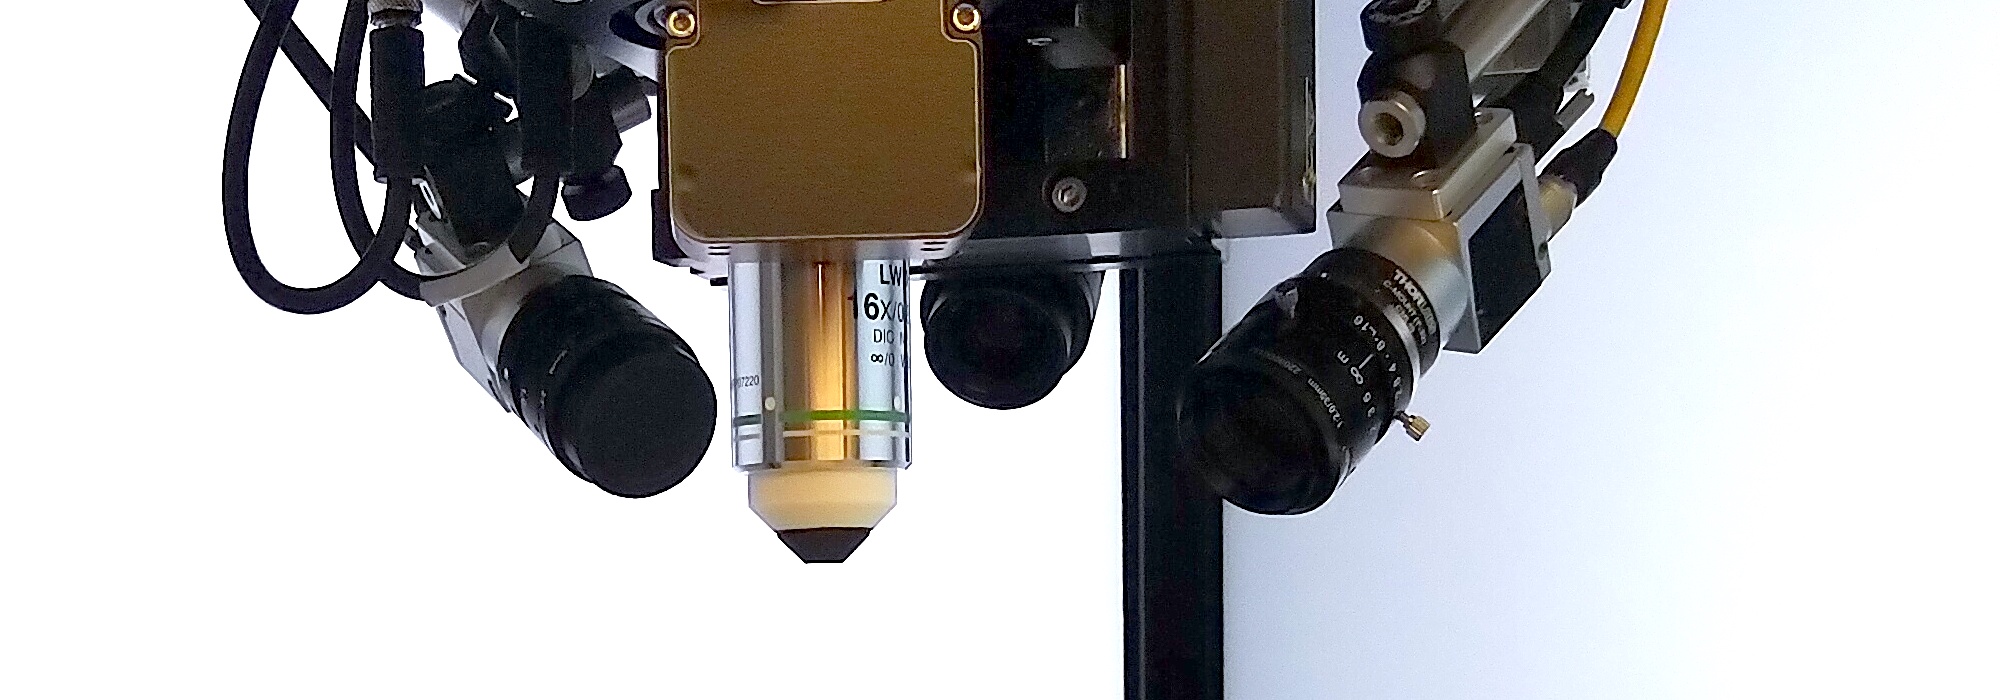 Two-photon microscope with eye and behavior tracking cameras